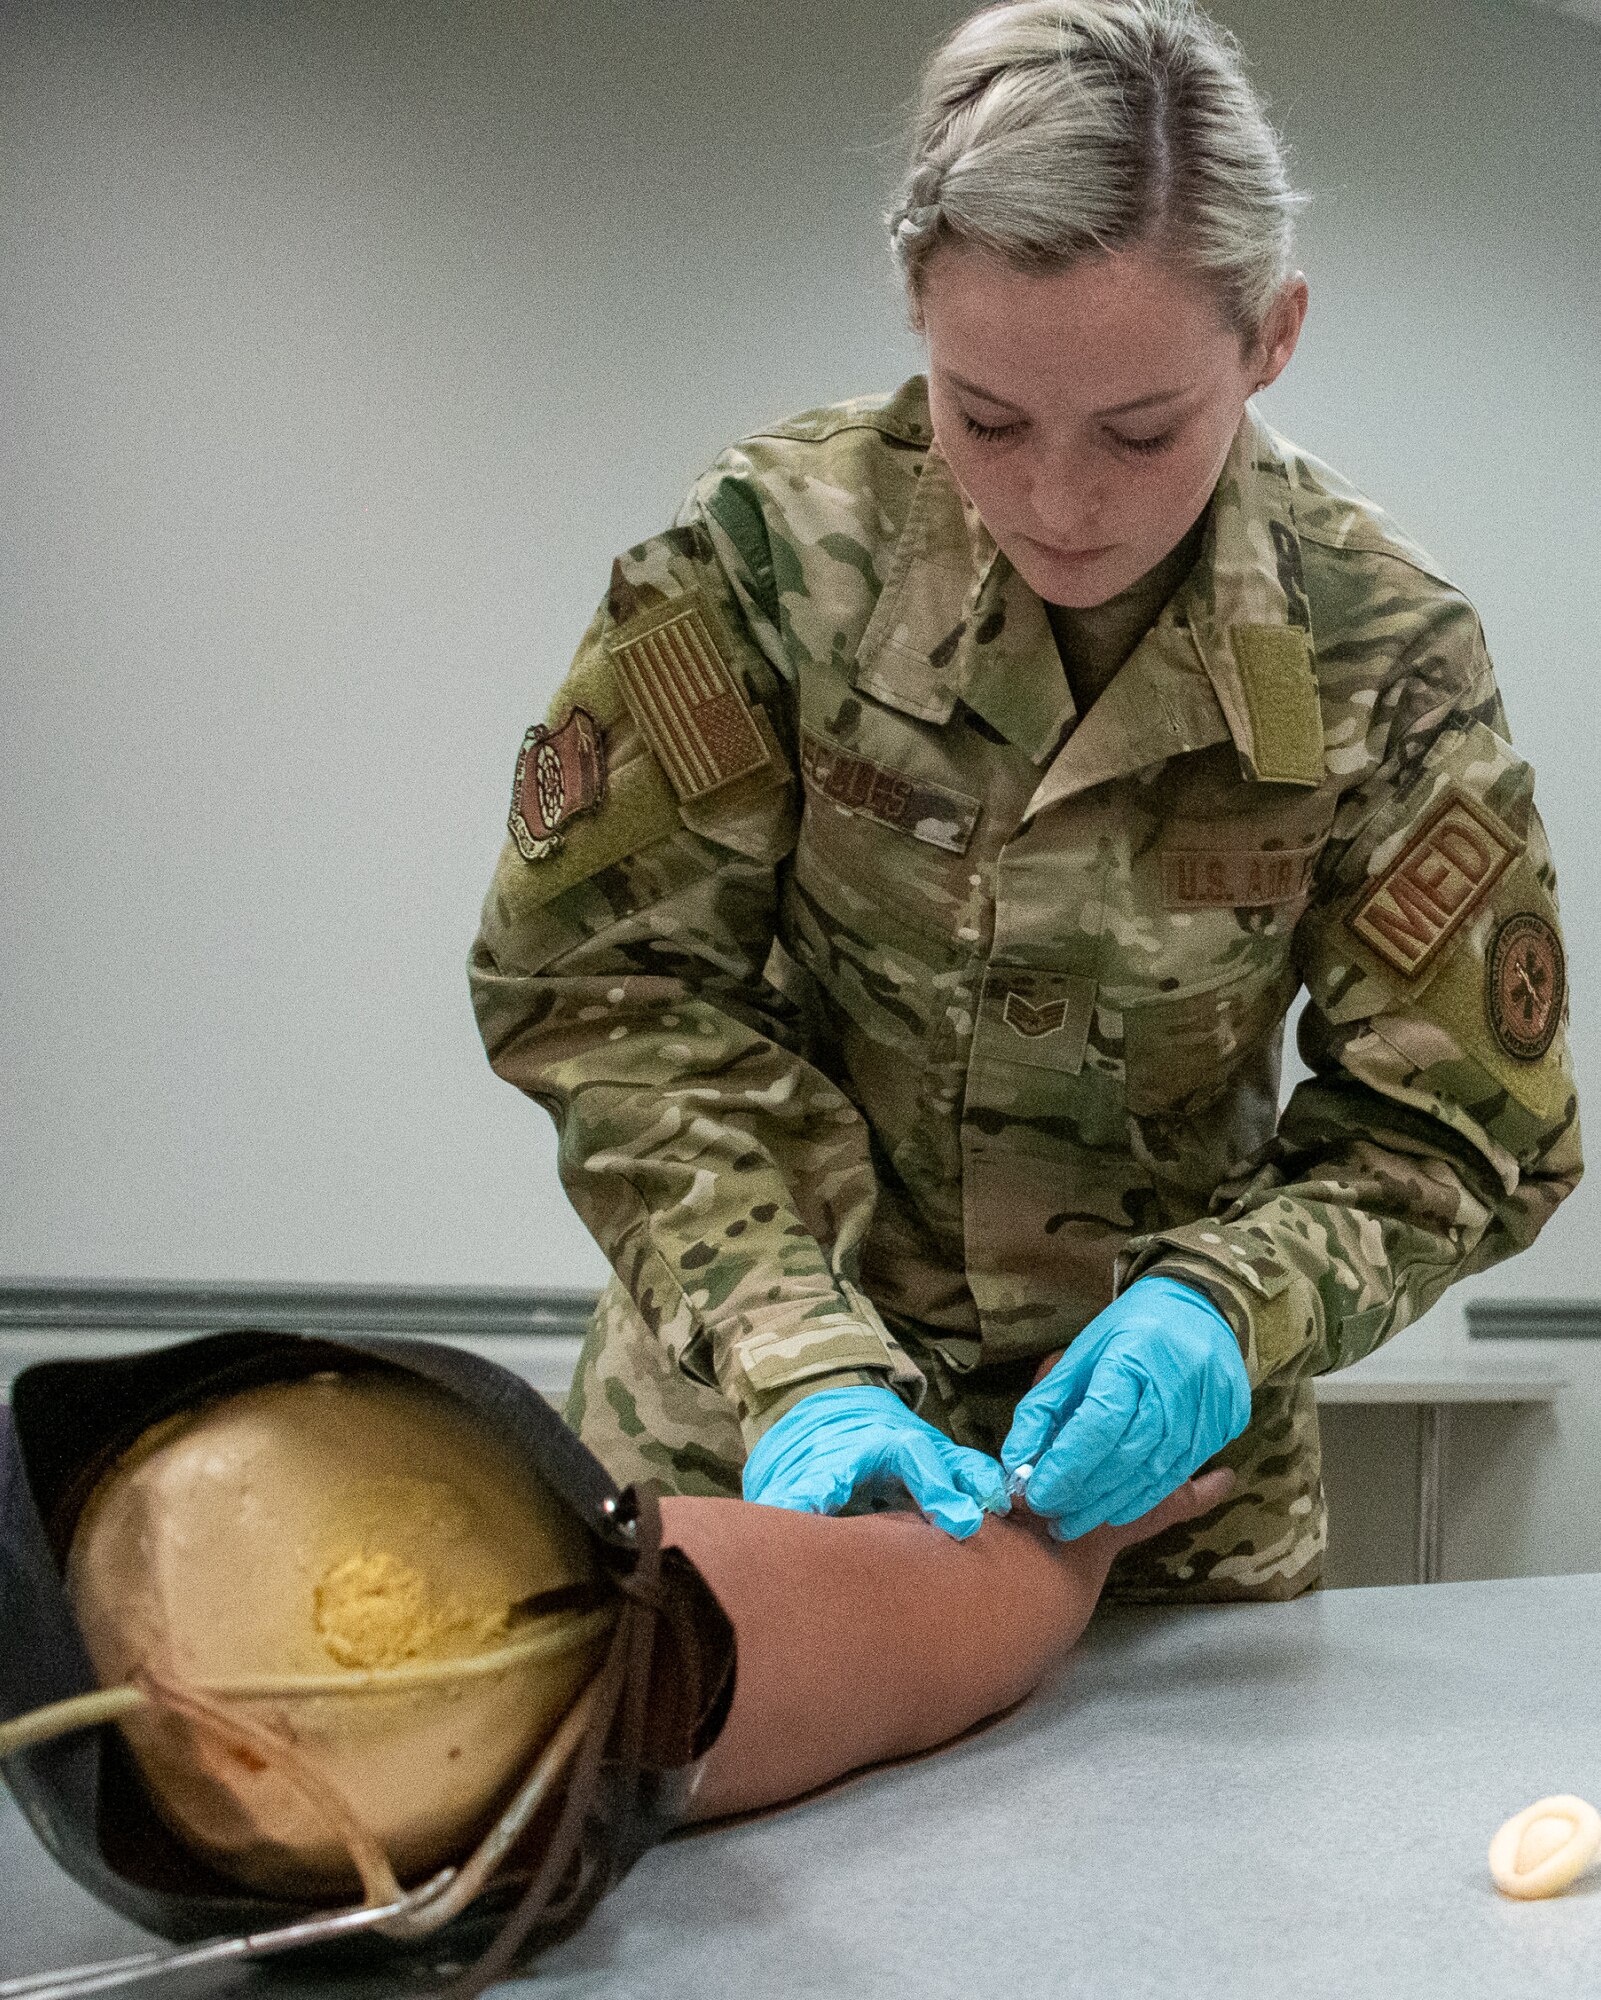 Staff Sgt. Abby Eccles, 932nd Medical Squadron medical technician, practices with an intravenous needle on the arm of a medical mannequin in preparation for a March Unit Training Assembly (UTA) medical exercise.  As a medical technician, she is a valuable, multi-faceted healthcare team member, augmenting other medical professionals to provide critical support and essential care in multiple medical roles, assisting doctors and care for patients in a wide range of situations, ranging from administering immunizations to supporting aeromedical evacuation operations.